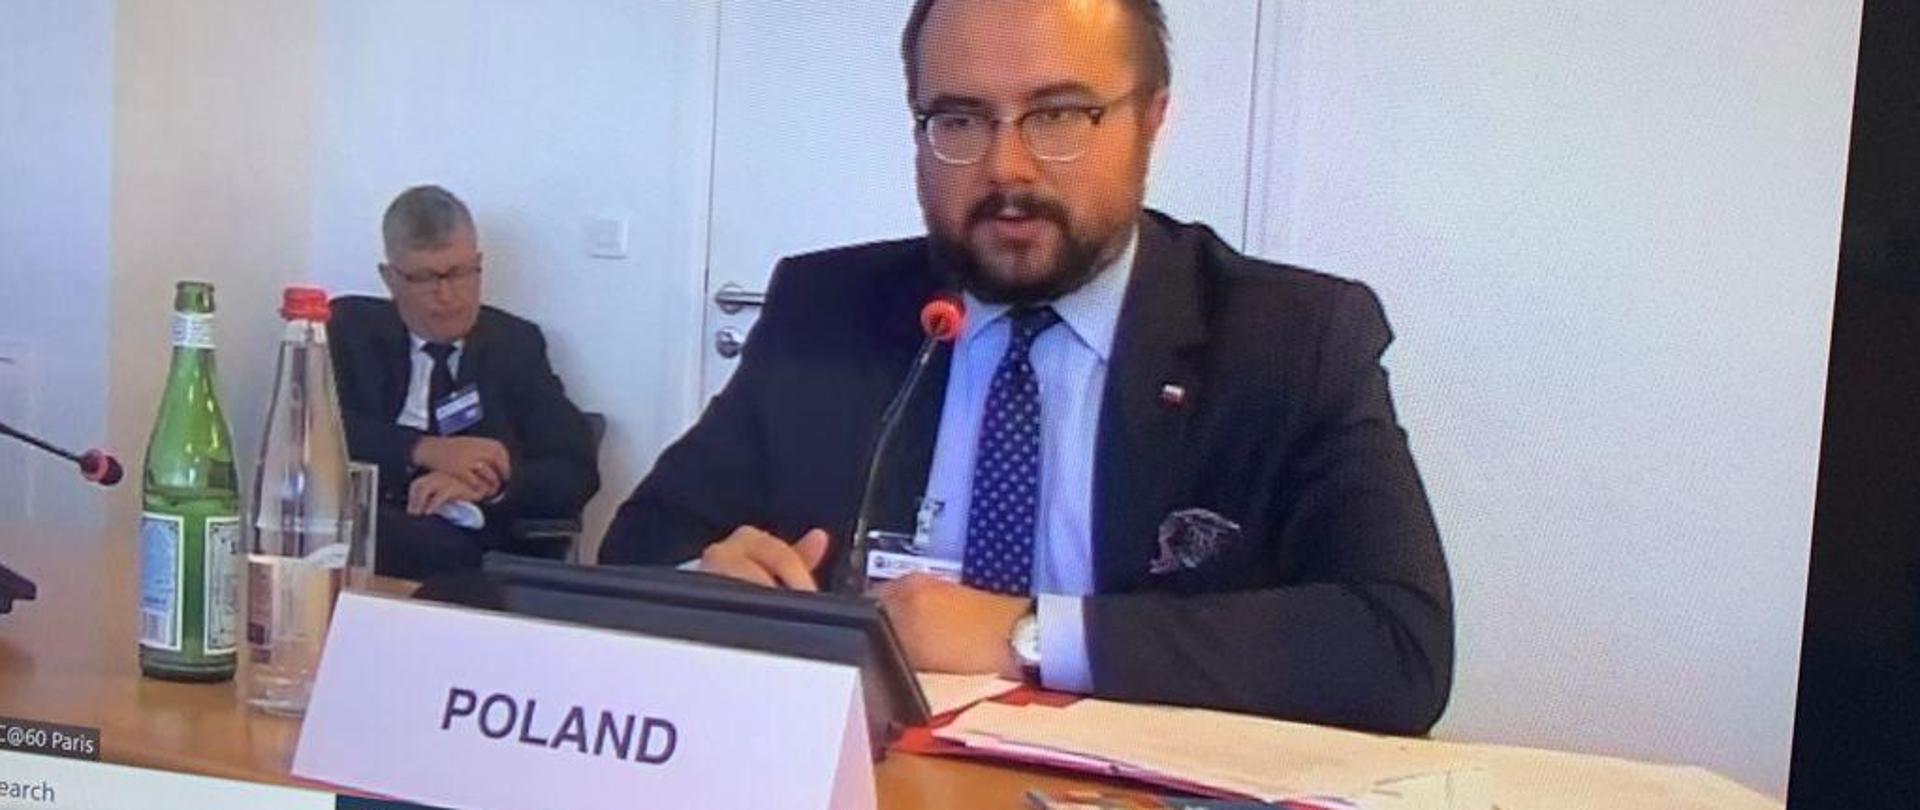 Deputy Minister Paweł Jabłoński represented Poland at a meeting to mark 60th anniversary of OECD Development Assistance Committee (DAC) in Paris